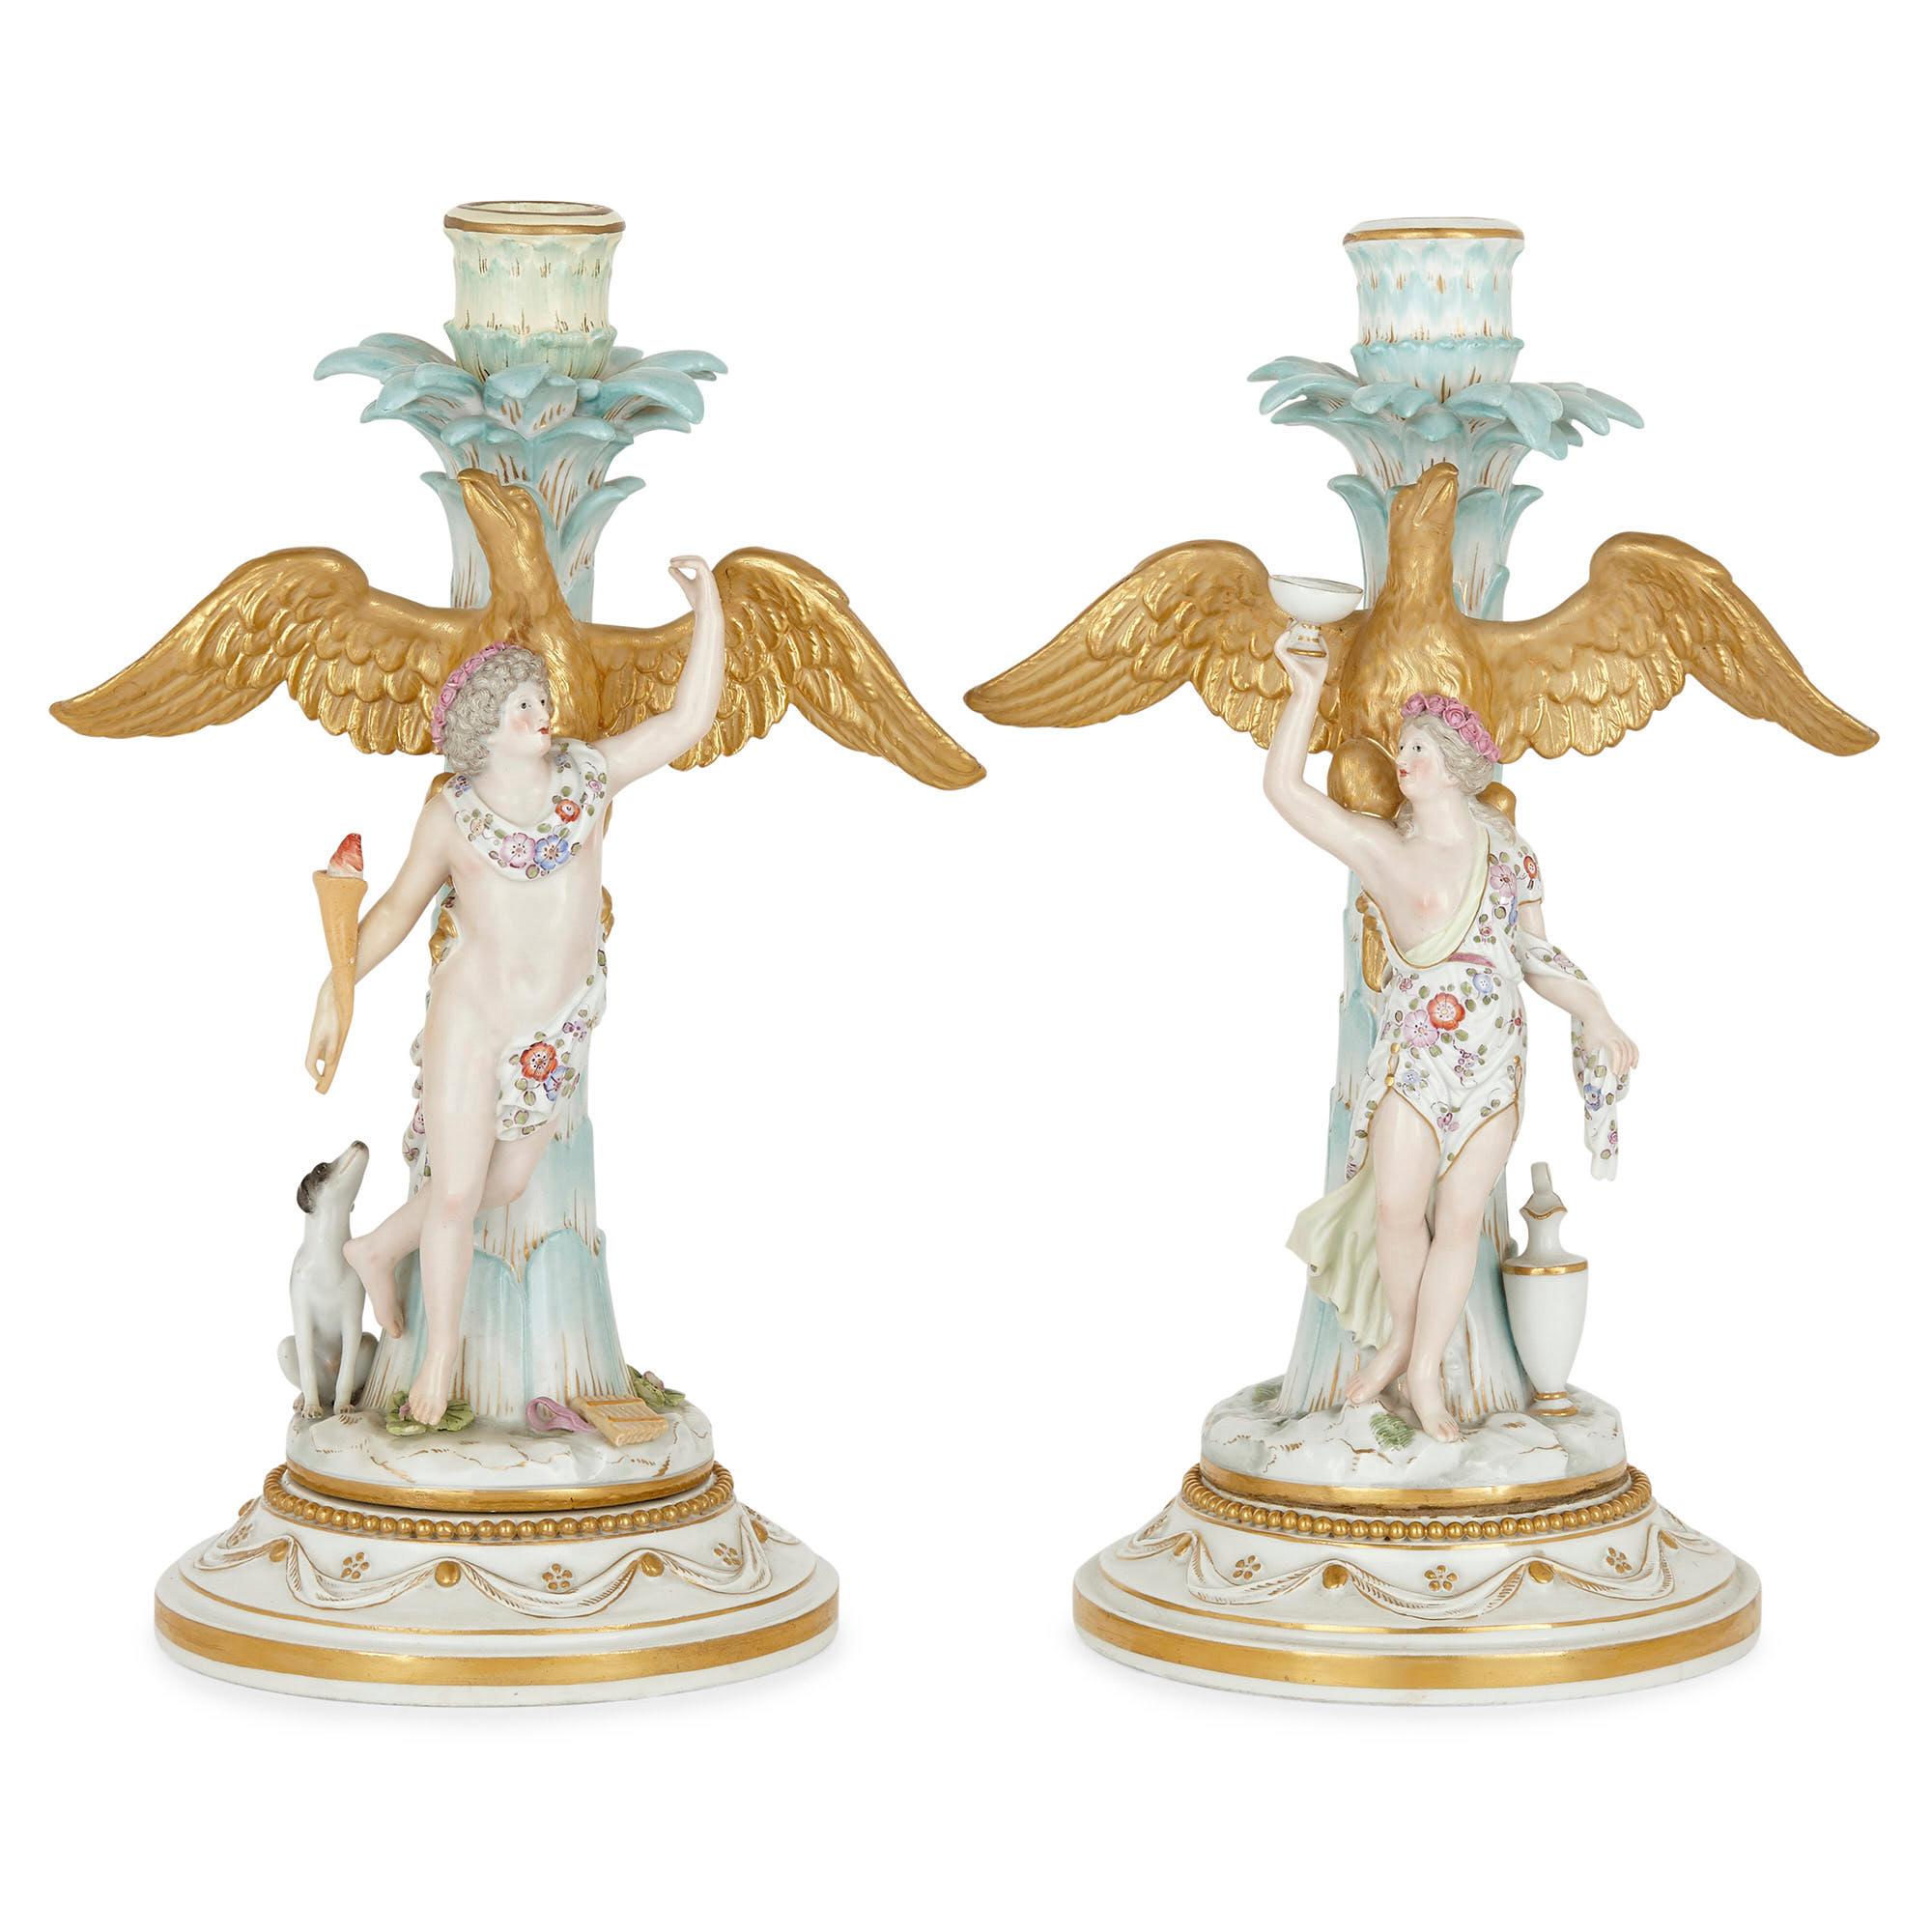 19th Century Pair of Rococo Style German Meissen Porcelain Candelabras For Sale